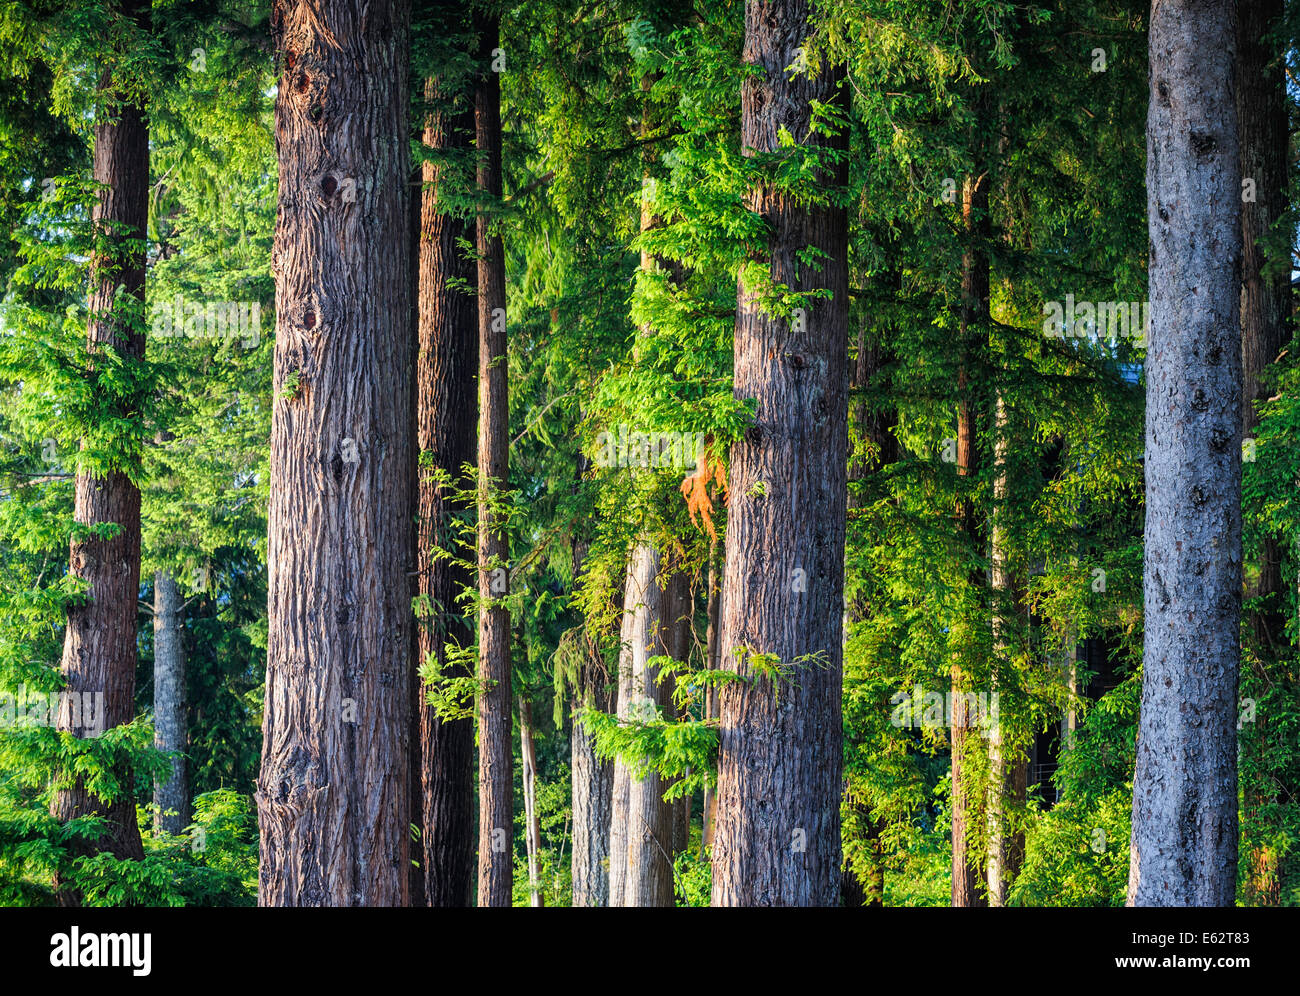 A forest of fir and hemlock trees on Lake Quinault in Olympic National Park in Washington state. Stock Photo